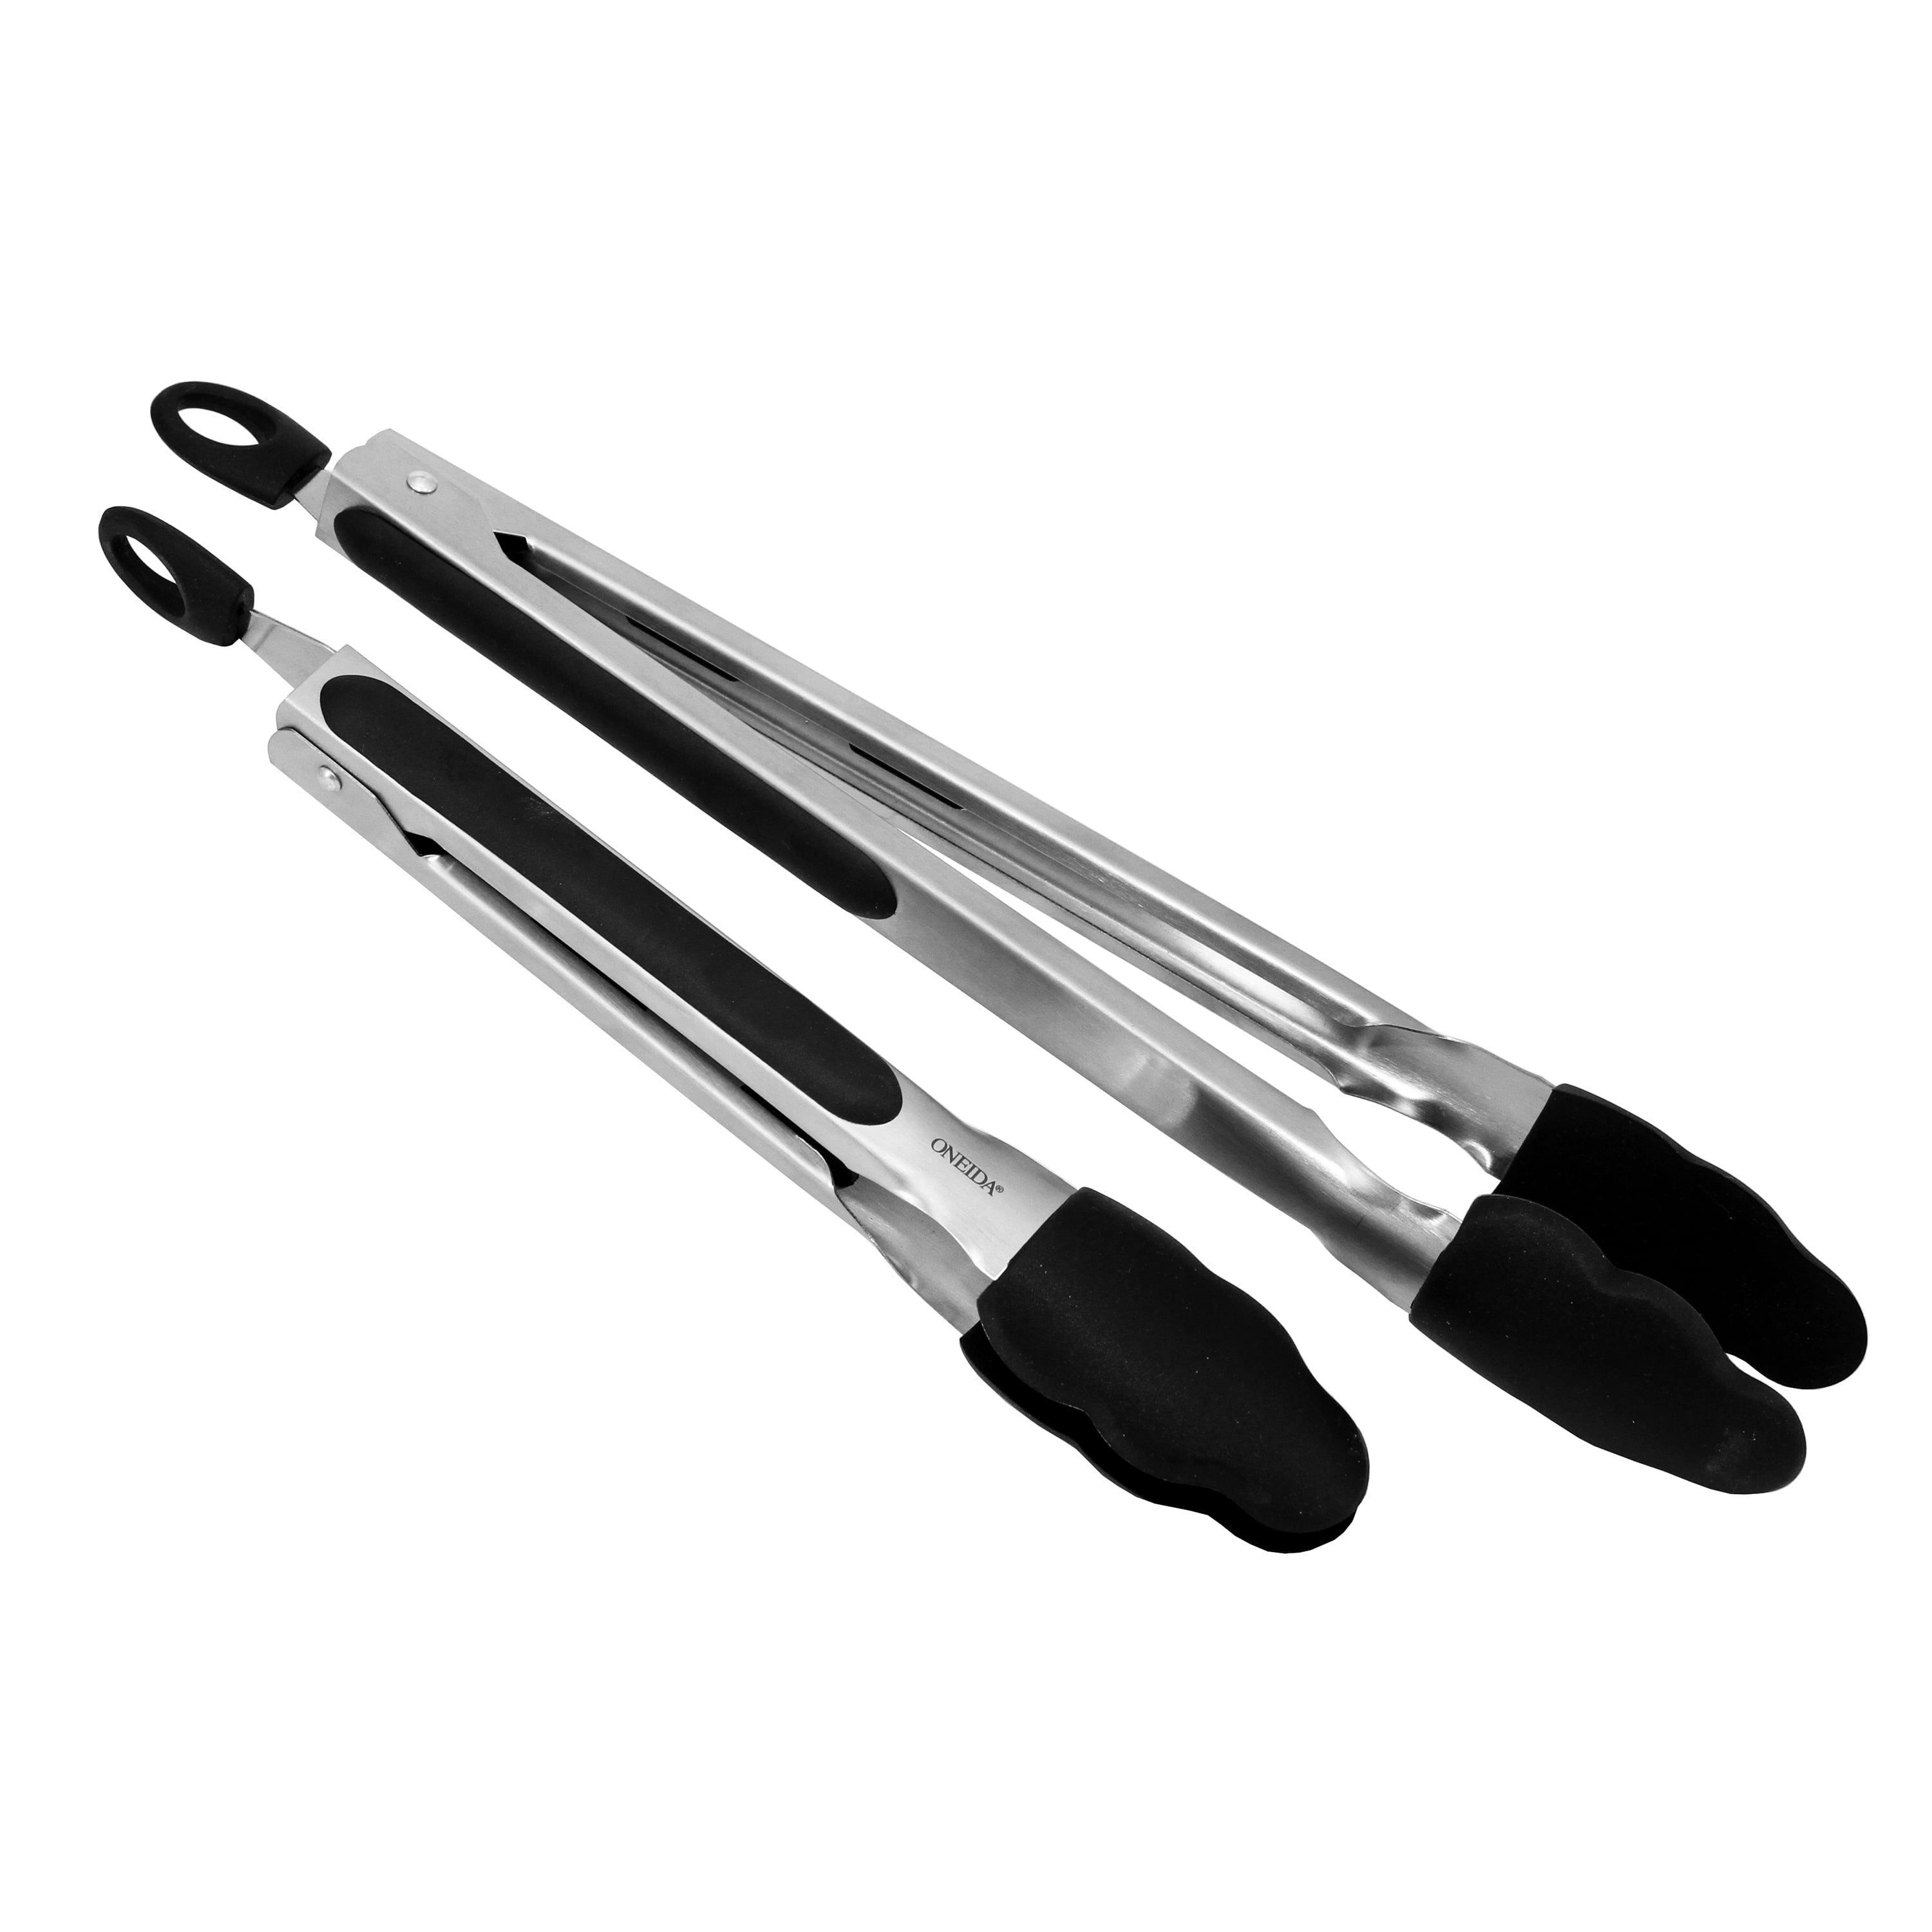 BINO 2-Piece Silicone Tipped Stainless Steel Tongs Set - Black | Locking  Tongs | Kitchen Utensil & Tool for Cooking & Serving | Nonstick Cookware 